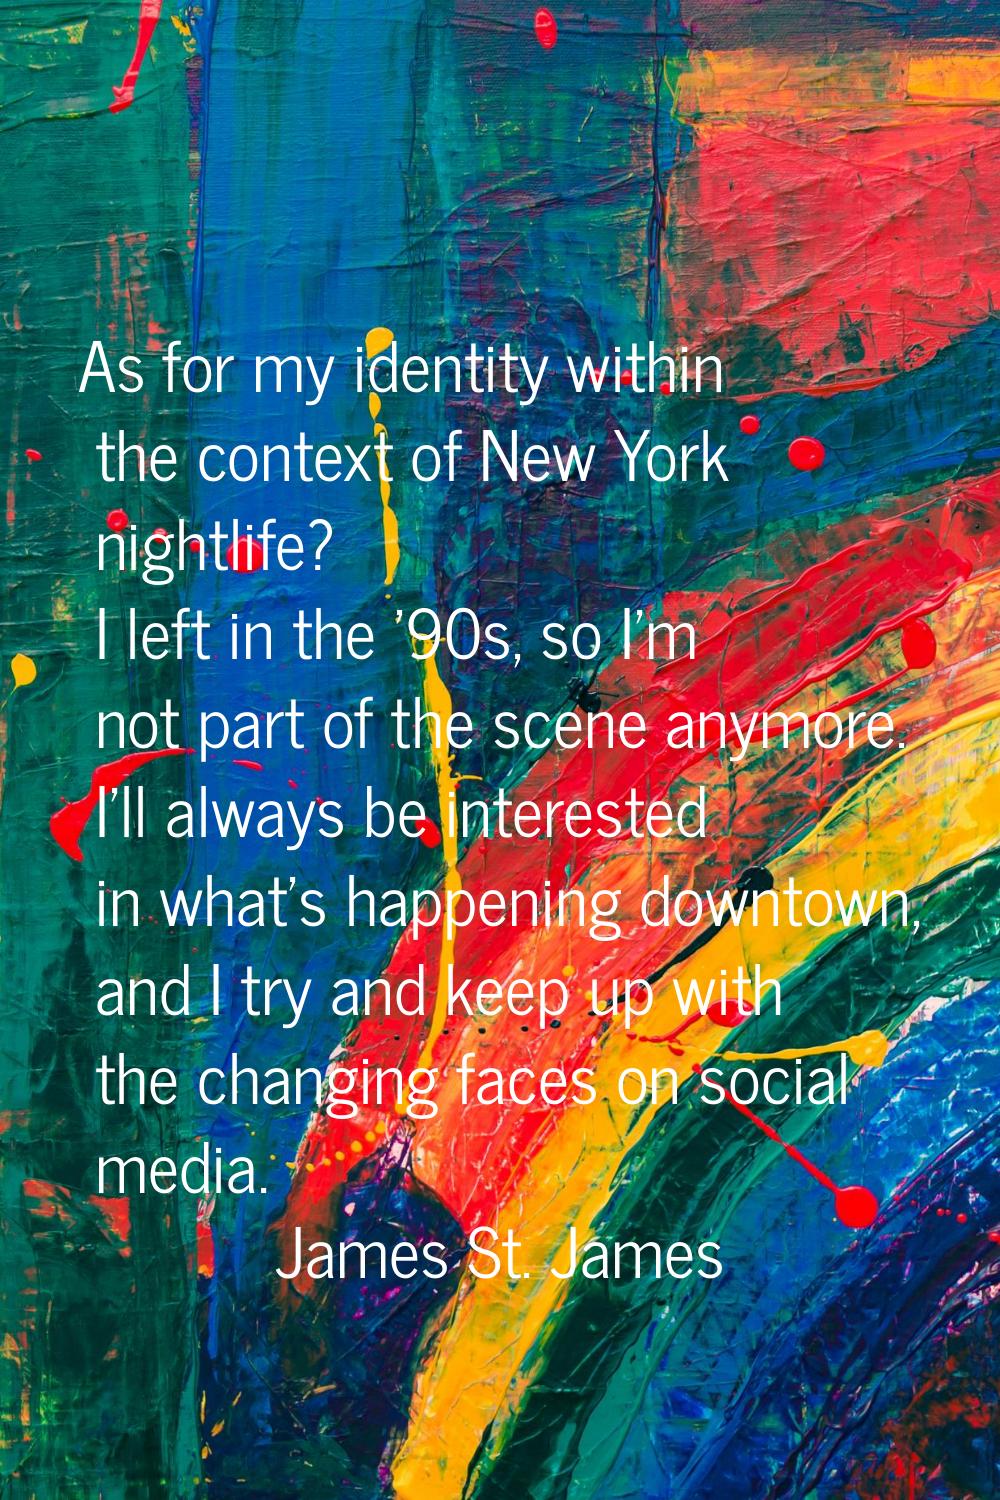 As for my identity within the context of New York nightlife? I left in the '90s, so I'm not part of